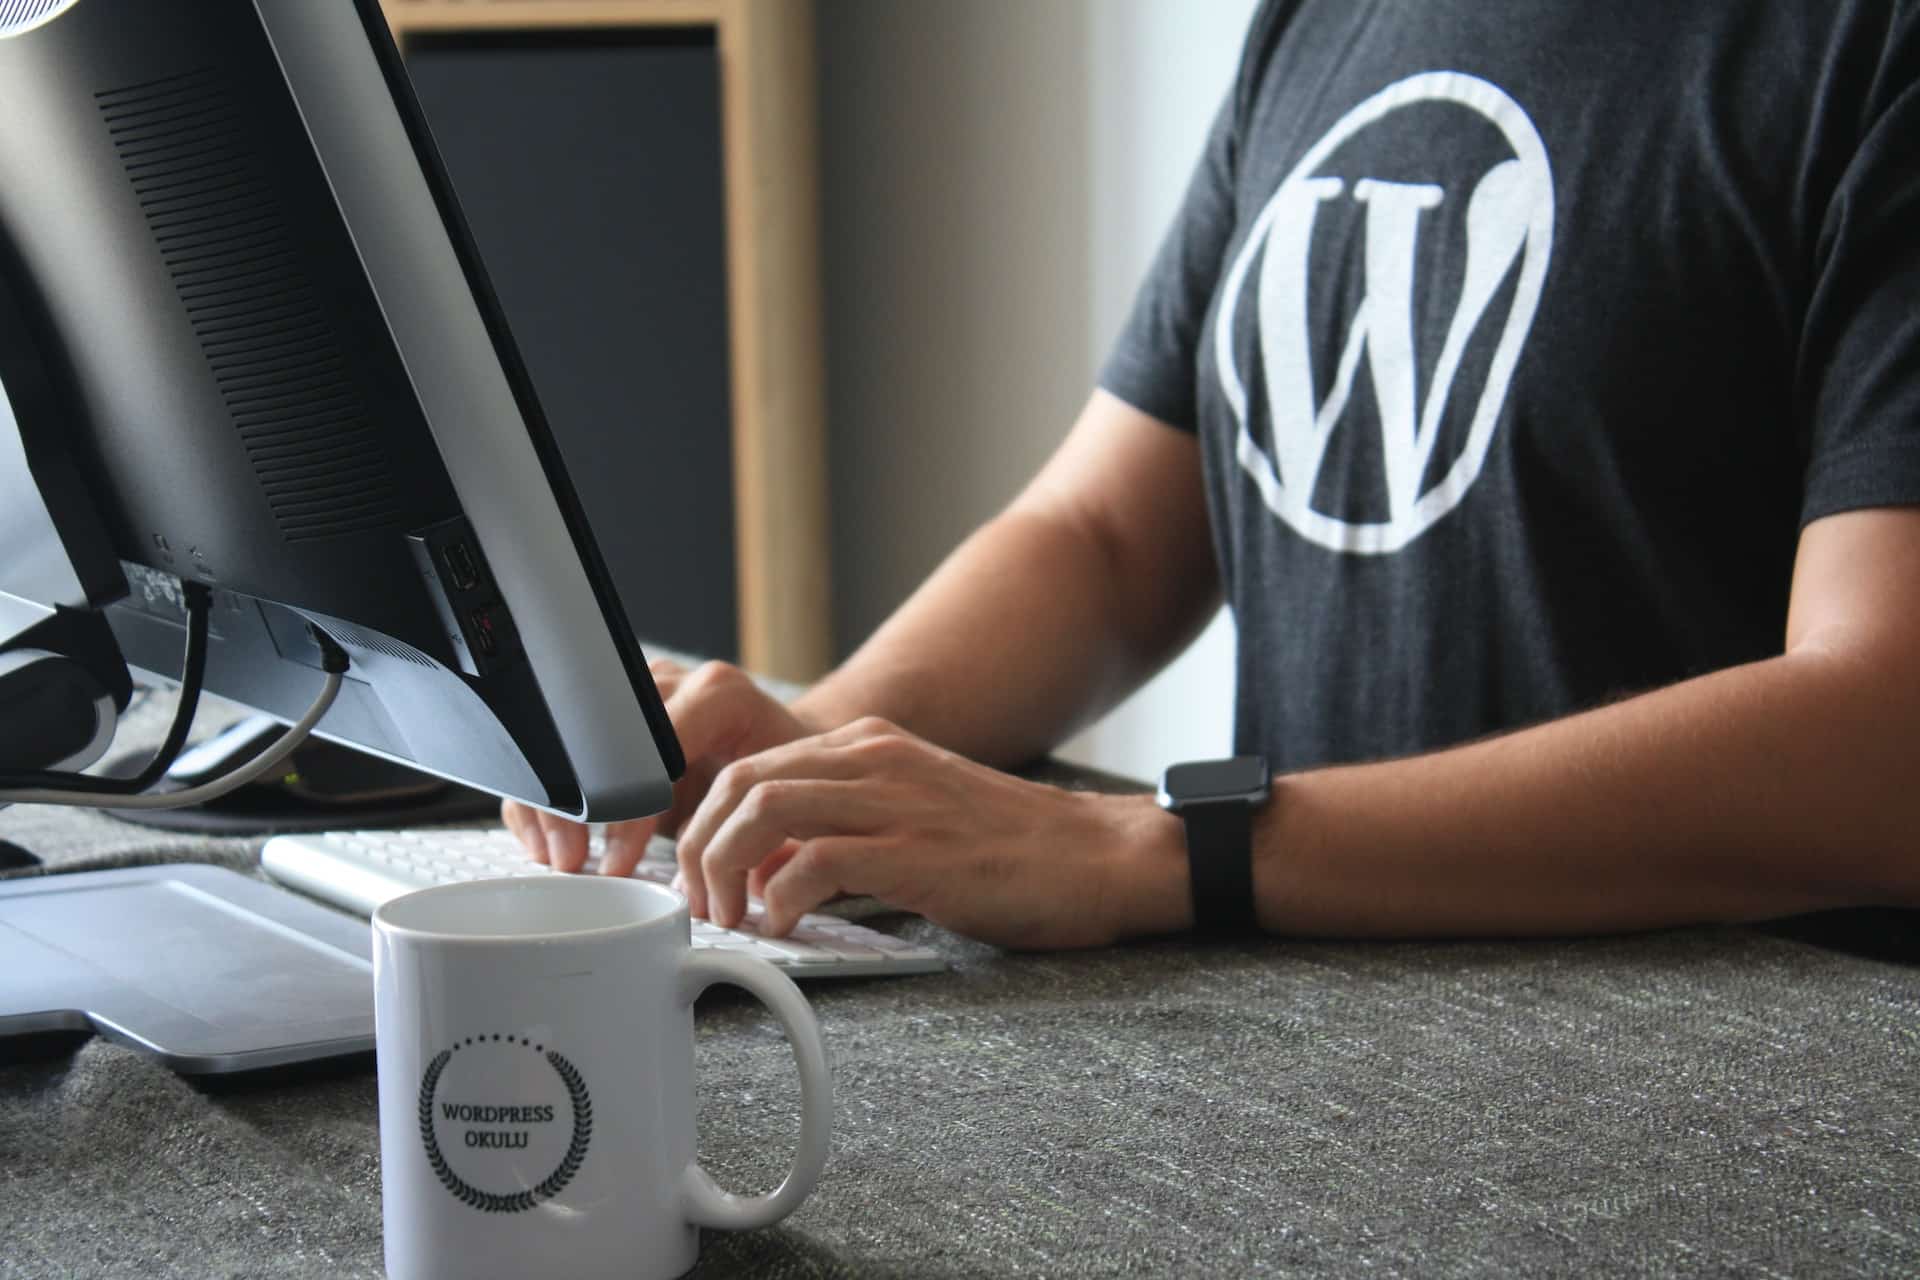 Why does WordPress reign supreme amongst other content management systems. Paces Creative explores the benefits of WordPress